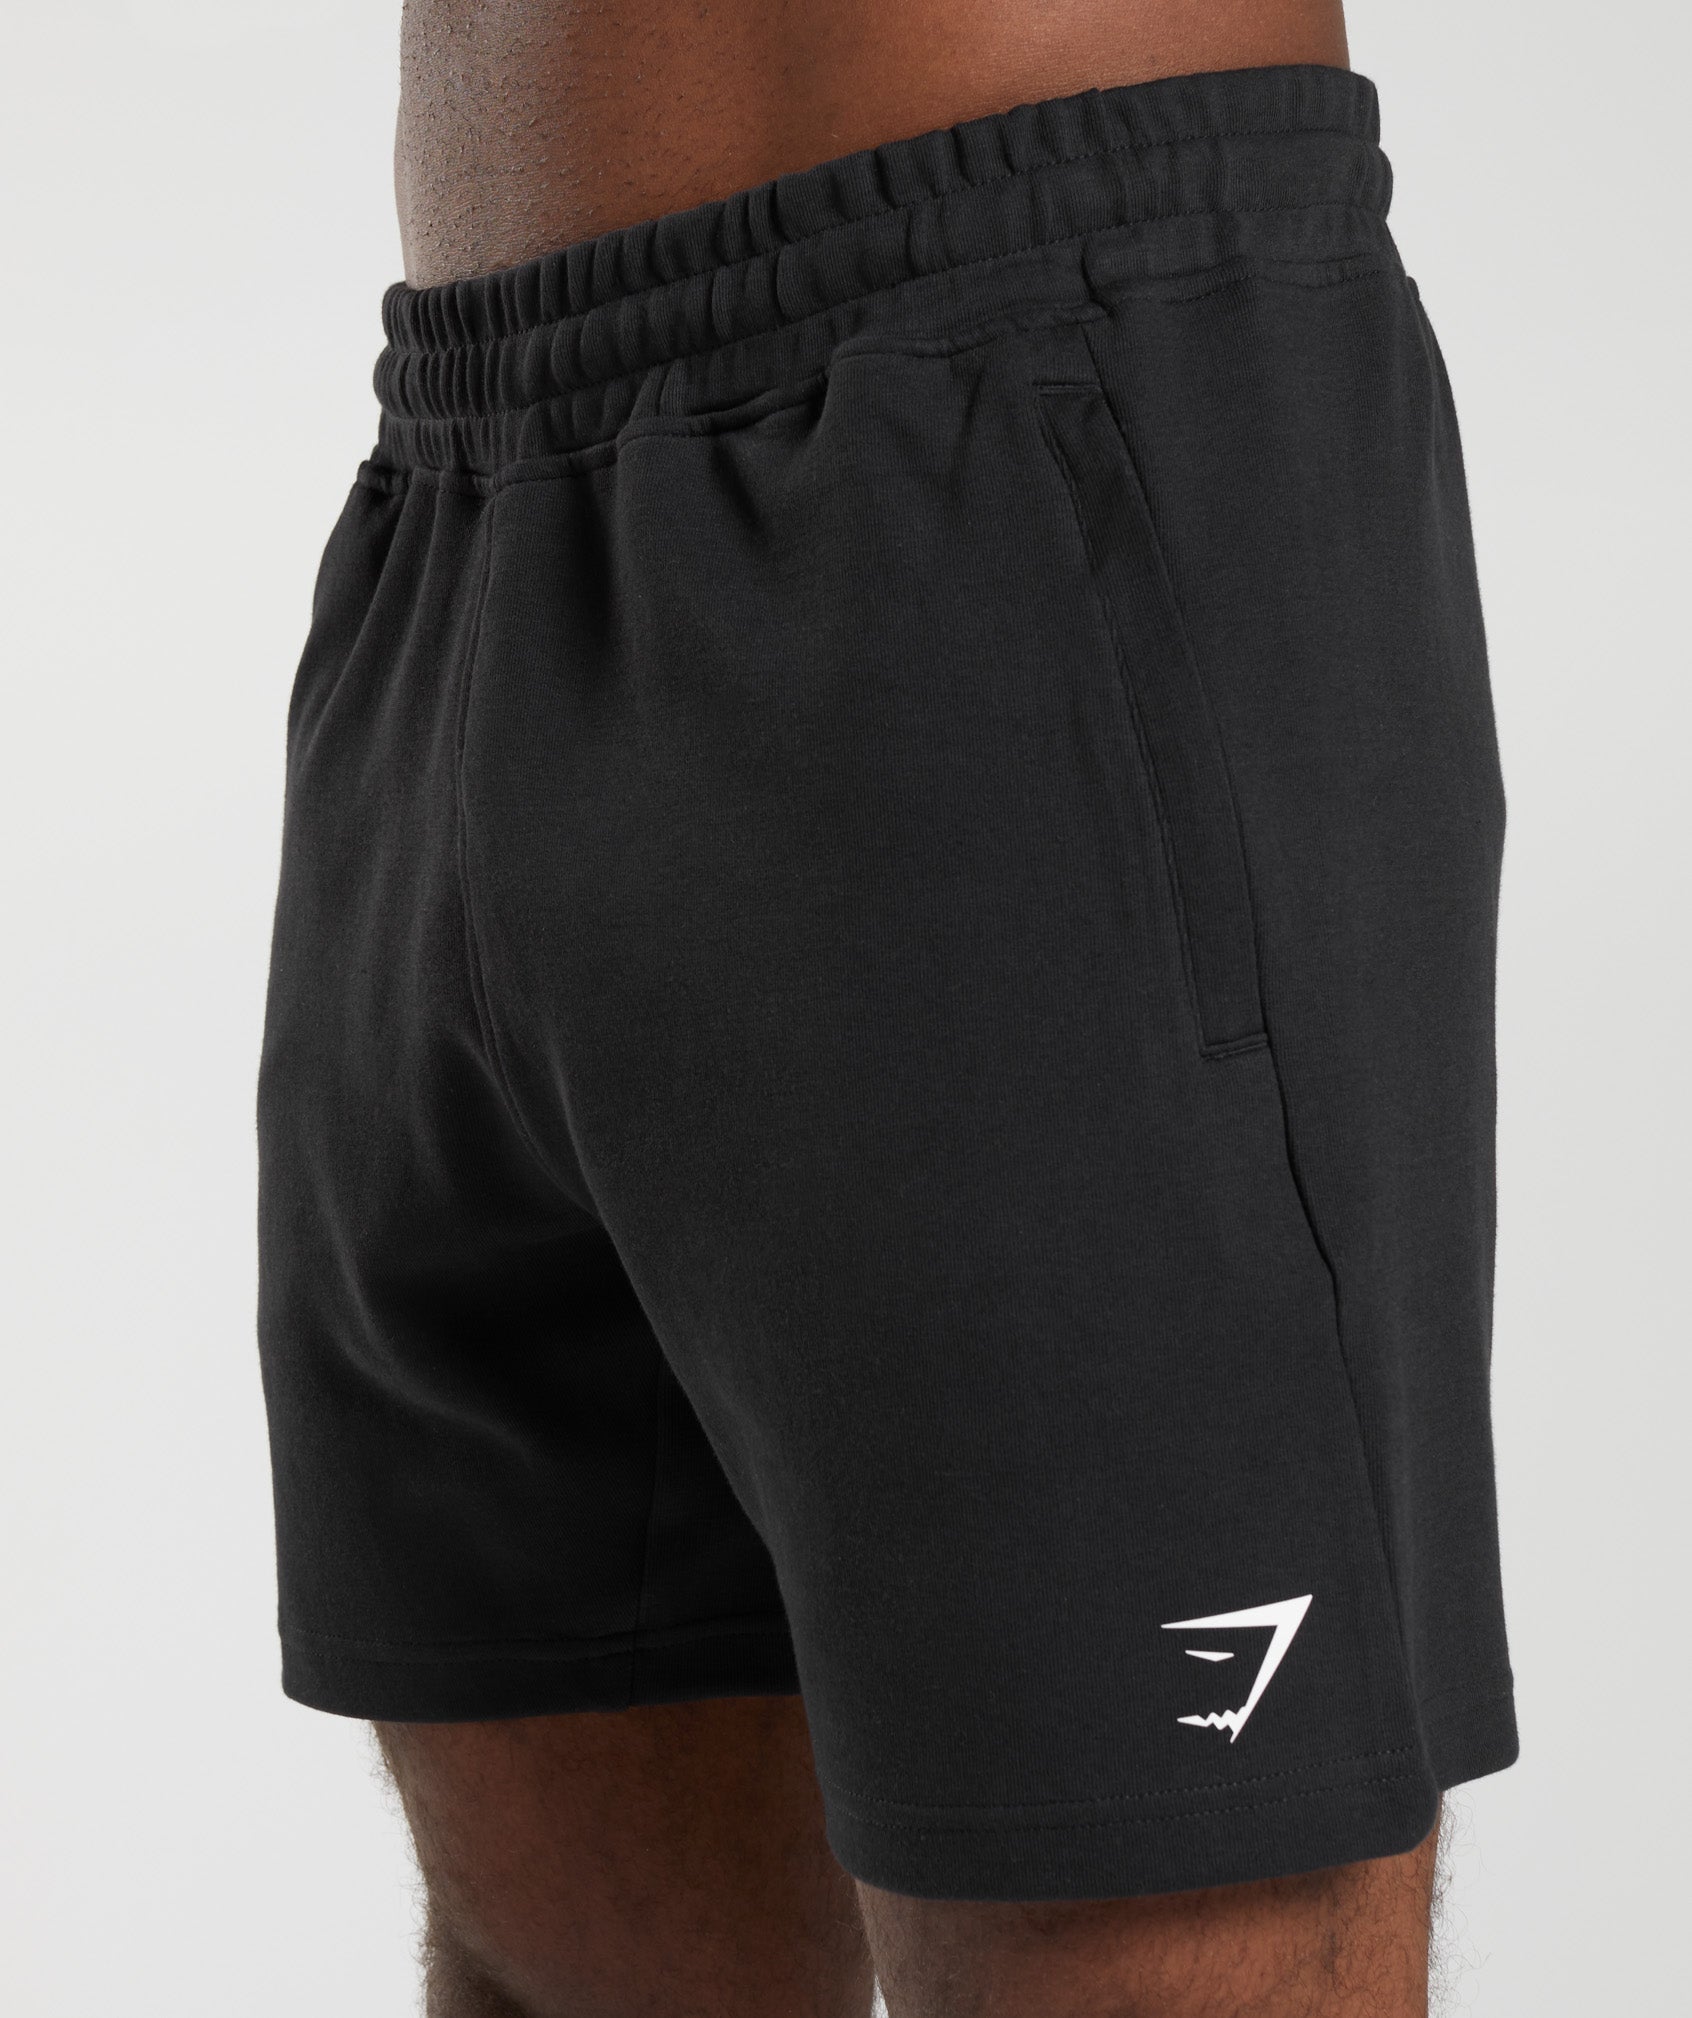 React 7" Shorts in Black - view 6